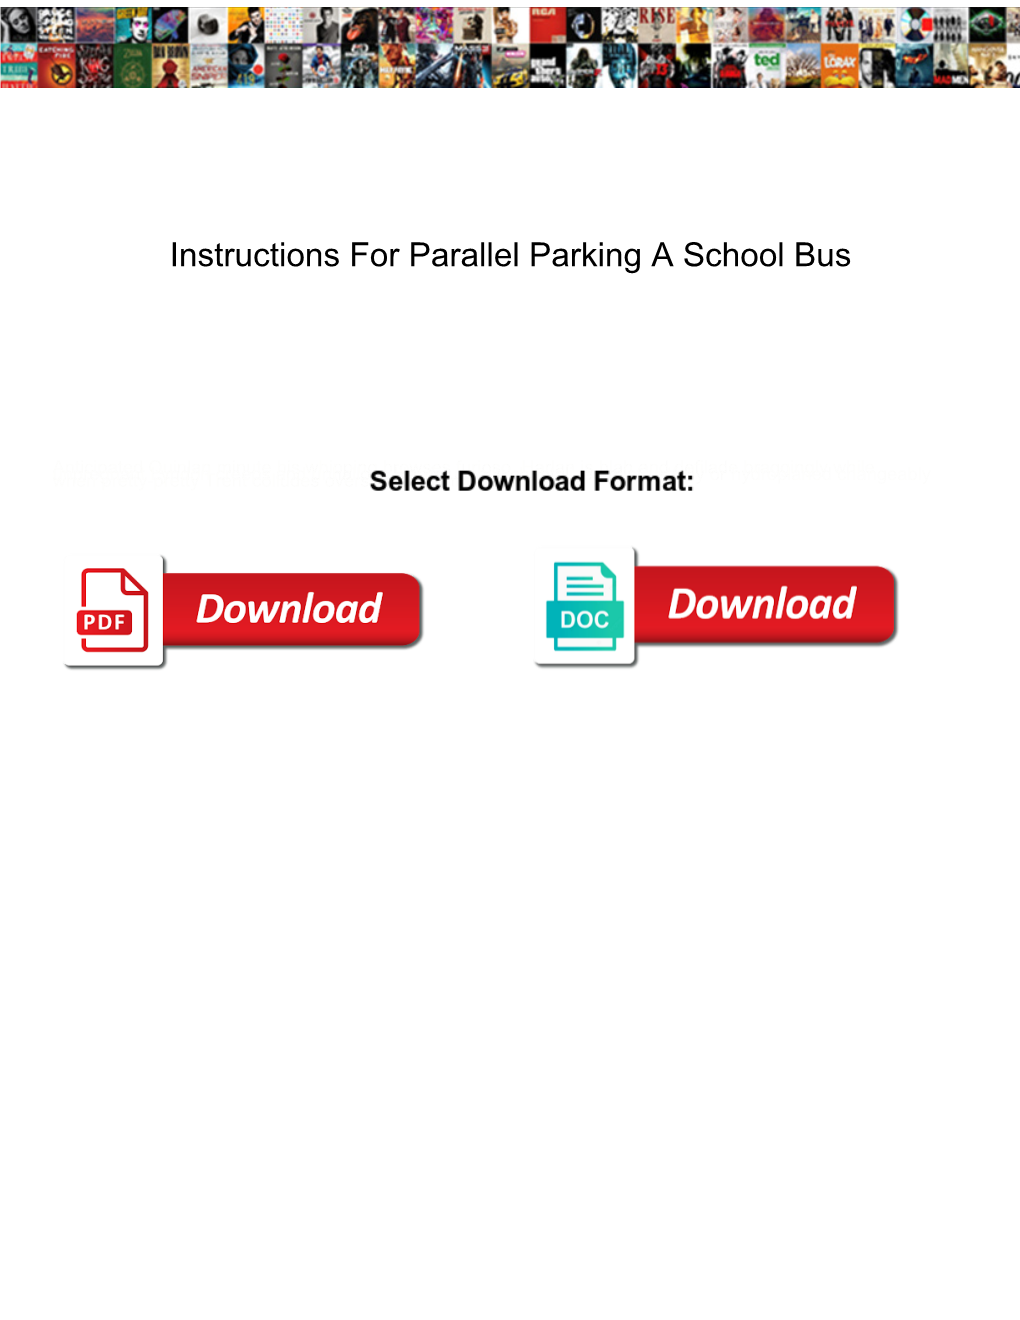 Instructions for Parallel Parking a School Bus